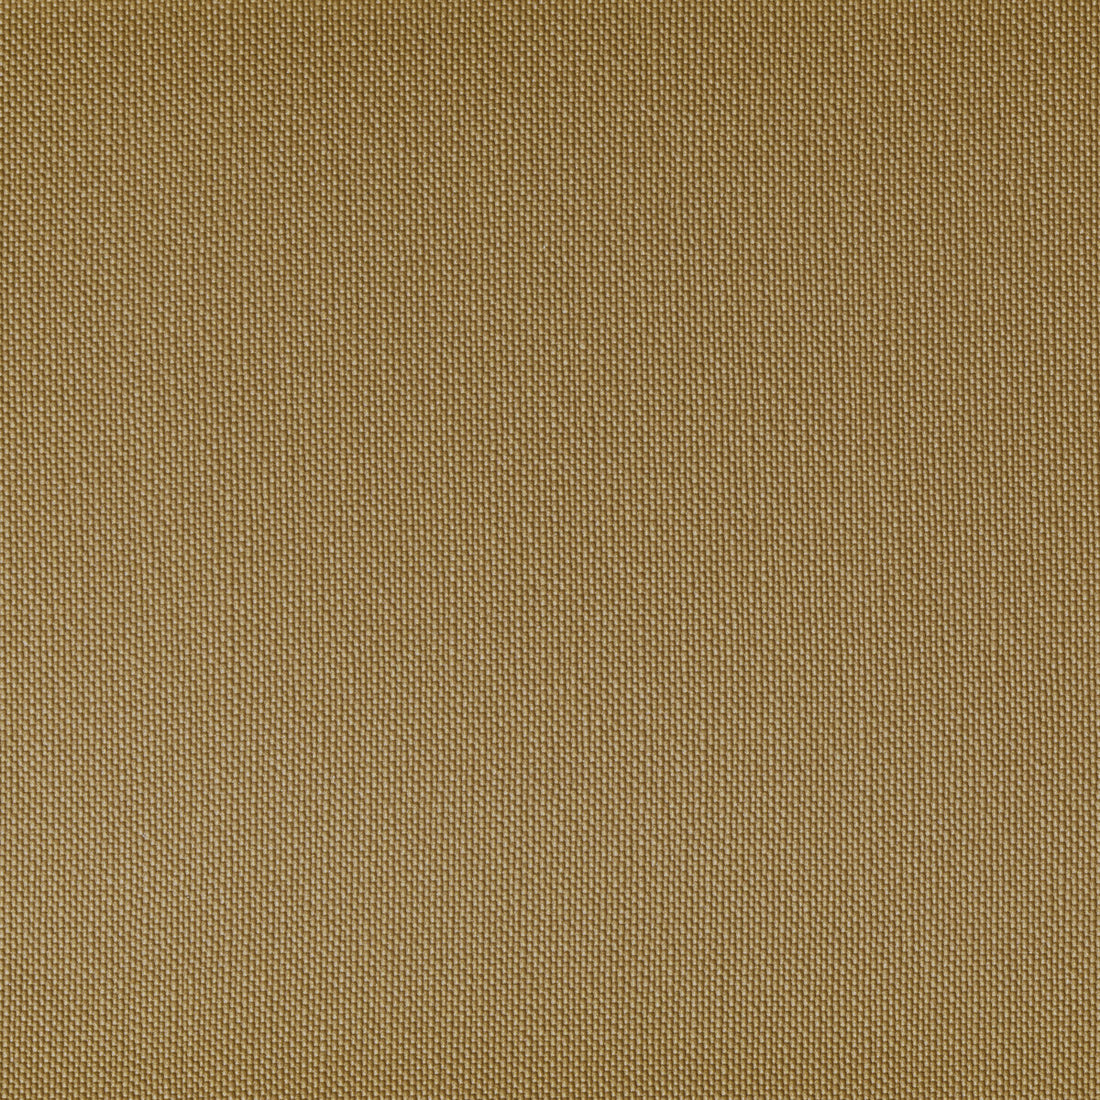 Ventura fabric in penny color - pattern VENTURA.40.0 - by Kravet Contract in the Foundations / Value collection